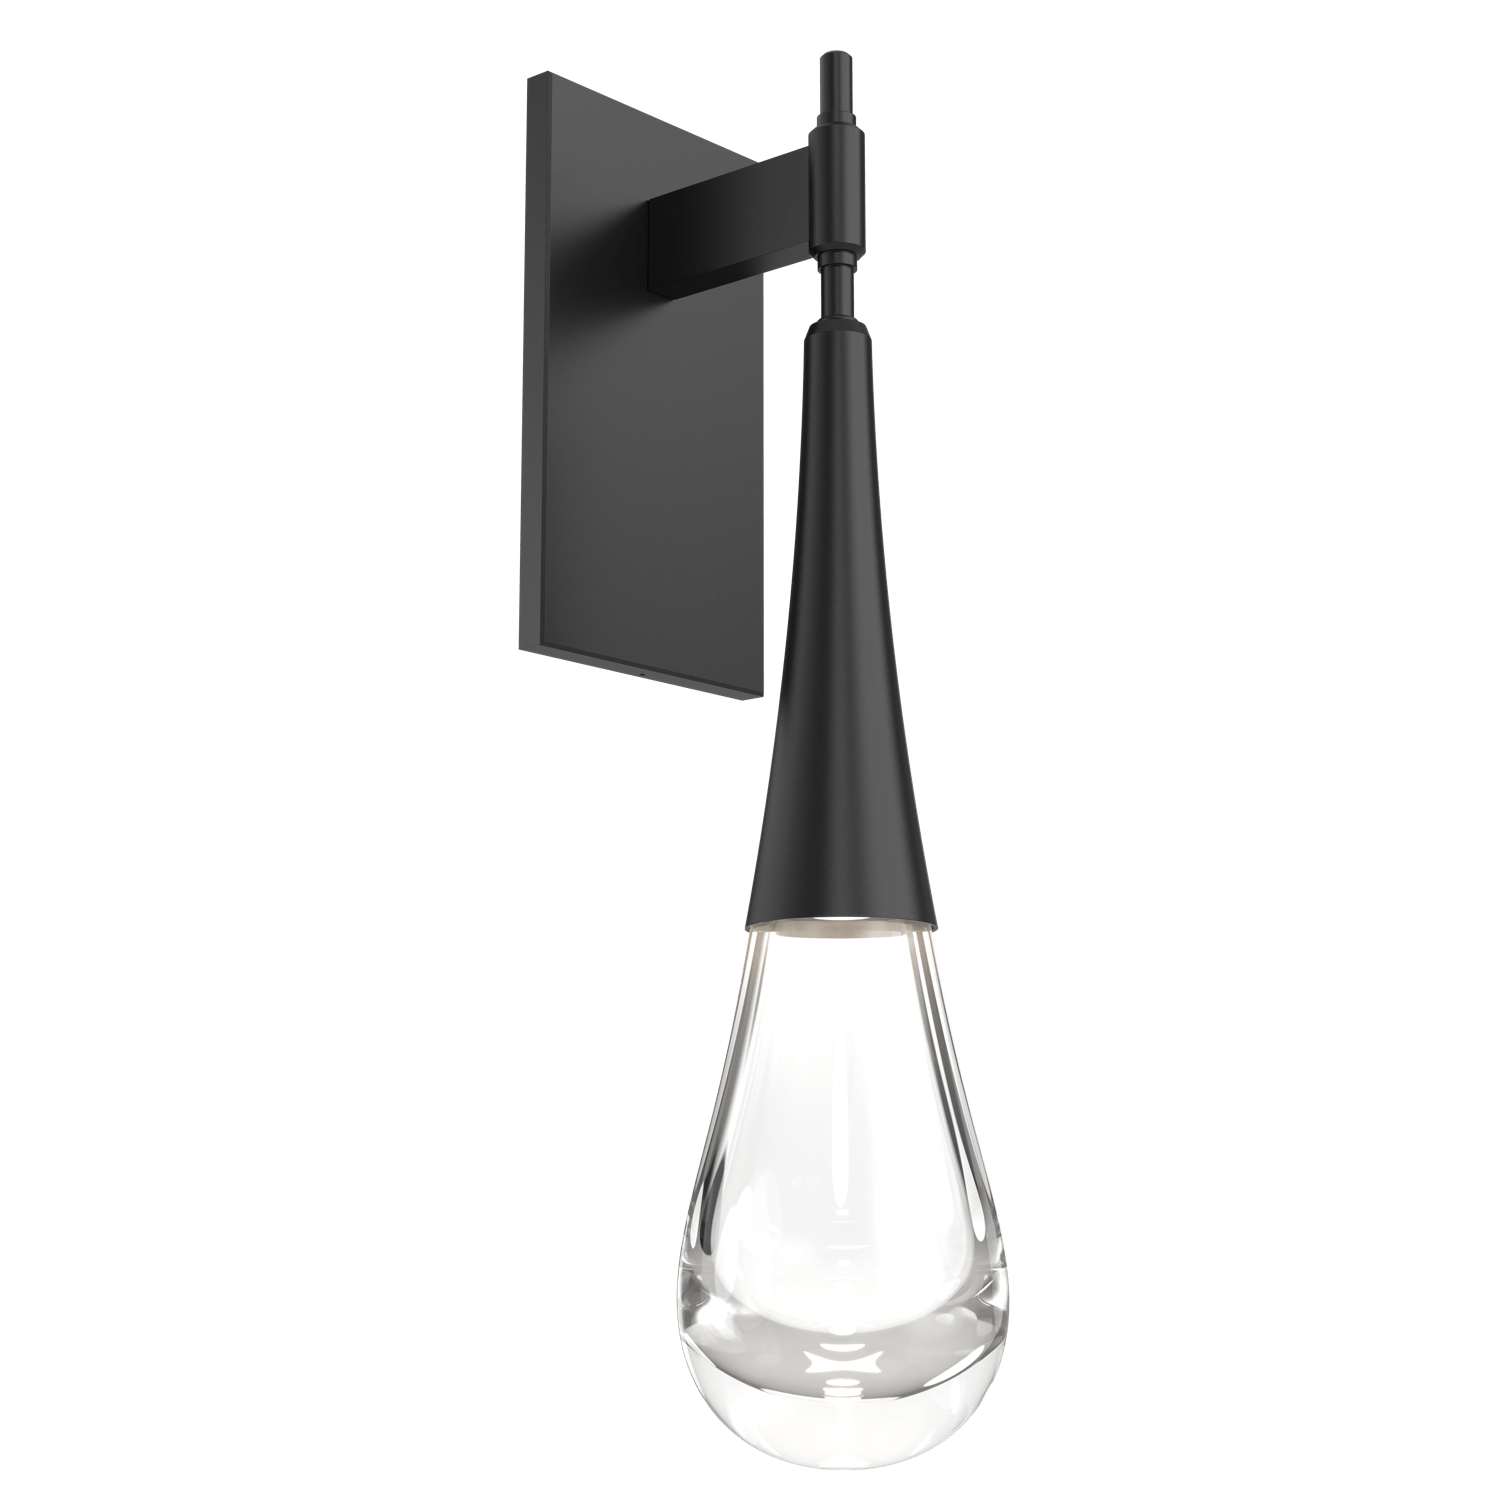 IDB0078-01-MB-Hammerton-Studio-Raindrop-wall-sconce-with-matte-black-finish-and-clear-blown-glass-shades-and-LED-lamping